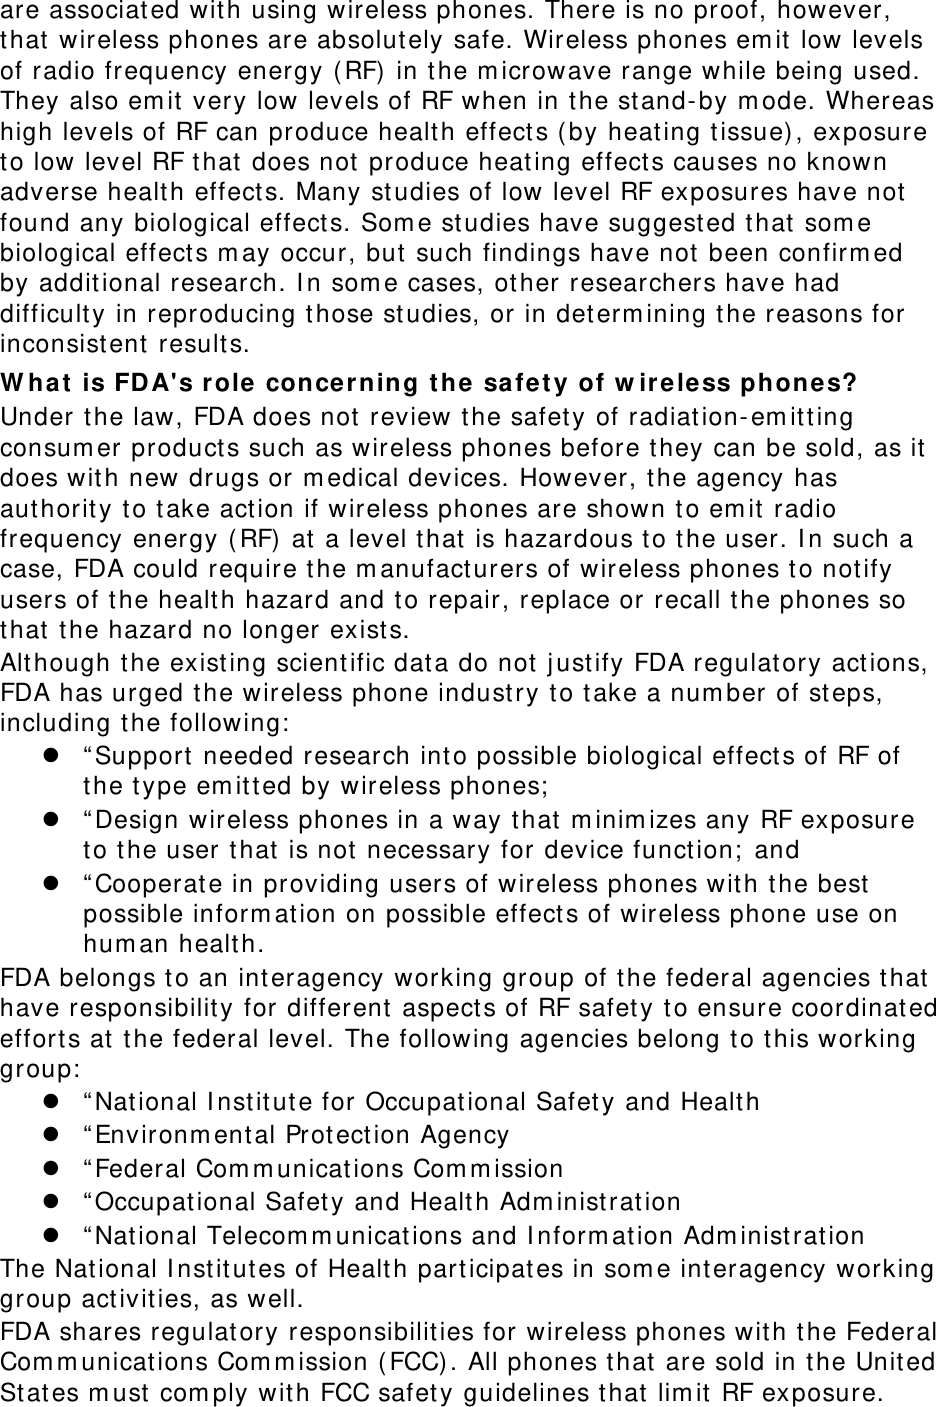 are associated with using wireless phones. There is no proof, however, that wireless phones are absolutely safe. Wireless phones emit low levels of radio frequency energy (RF) in the microwave range while being used. They also emit very low levels of RF when in the stand-by mode. Whereas high levels of RF can produce health effects (by heating tissue), exposure to low level RF that does not produce heating effects causes no known adverse health effects. Many studies of low level RF exposures have not found any biological effects. Some studies have suggested that some biological effects may occur, but such findings have not been confirmed by additional research. In some cases, other researchers have had difficulty in reproducing those studies, or in determining the reasons for inconsistent results. What is FDA&apos;s role concerning the safety of wireless phones? Under the law, FDA does not review the safety of radiation-emitting consumer products such as wireless phones before they can be sold, as it does with new drugs or medical devices. However, the agency has authority to take action if wireless phones are shown to emit radio frequency energy (RF) at a level that is hazardous to the user. In such a case, FDA could require the manufacturers of wireless phones to notify users of the health hazard and to repair, replace or recall the phones so that the hazard no longer exists. Although the existing scientific data do not justify FDA regulatory actions, FDA has urged the wireless phone industry to take a number of steps, including the following:  “Support needed research into possible biological effects of RF of the type emitted by wireless phones;  “Design wireless phones in a way that minimizes any RF exposure to the user that is not necessary for device function; and  “Cooperate in providing users of wireless phones with the best possible information on possible effects of wireless phone use on human health. FDA belongs to an interagency working group of the federal agencies that have responsibility for different aspects of RF safety to ensure coordinated efforts at the federal level. The following agencies belong to this working group:  “National Institute for Occupational Safety and Health  “Environmental Protection Agency  “Federal Communications Commission  “Occupational Safety and Health Administration  “National Telecommunications and Information Administration The National Institutes of Health participates in some interagency working group activities, as well. FDA shares regulatory responsibilities for wireless phones with the Federal Communications Commission (FCC). All phones that are sold in the United States must comply with FCC safety guidelines that limit RF exposure. 